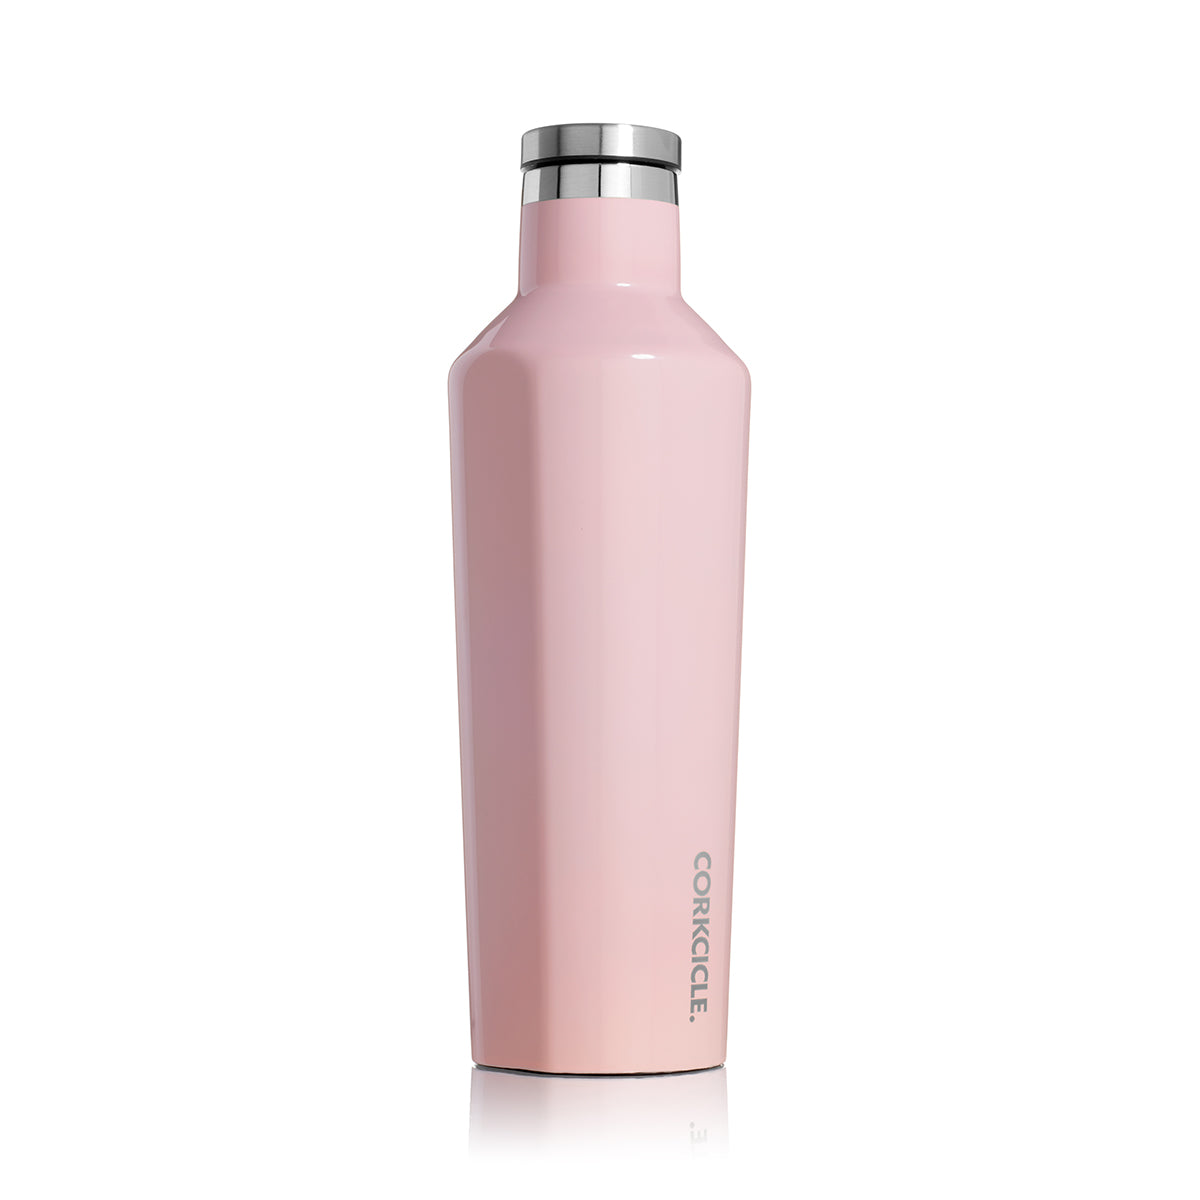 Corkcicle Classic Canteen 475ml - Rose Quartz - Insulated Stainless Steel Bottle